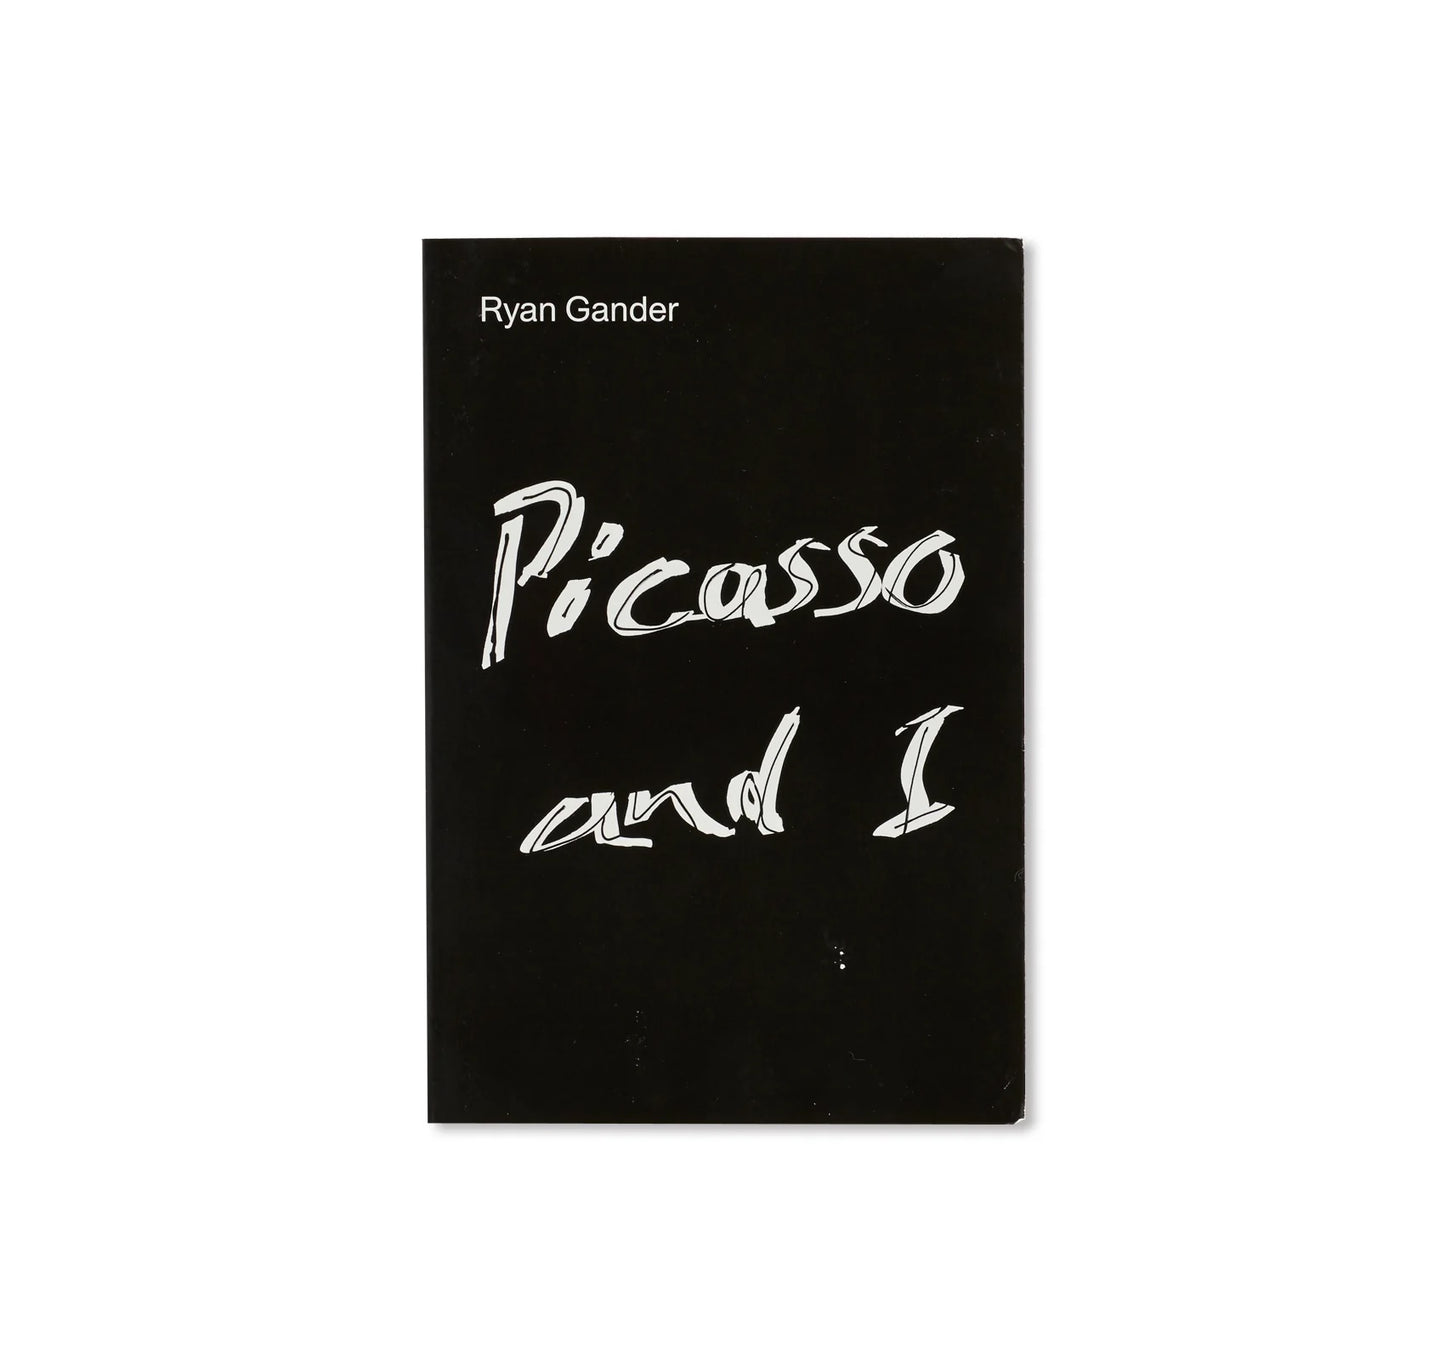 Ryan Gander: Picasso and I